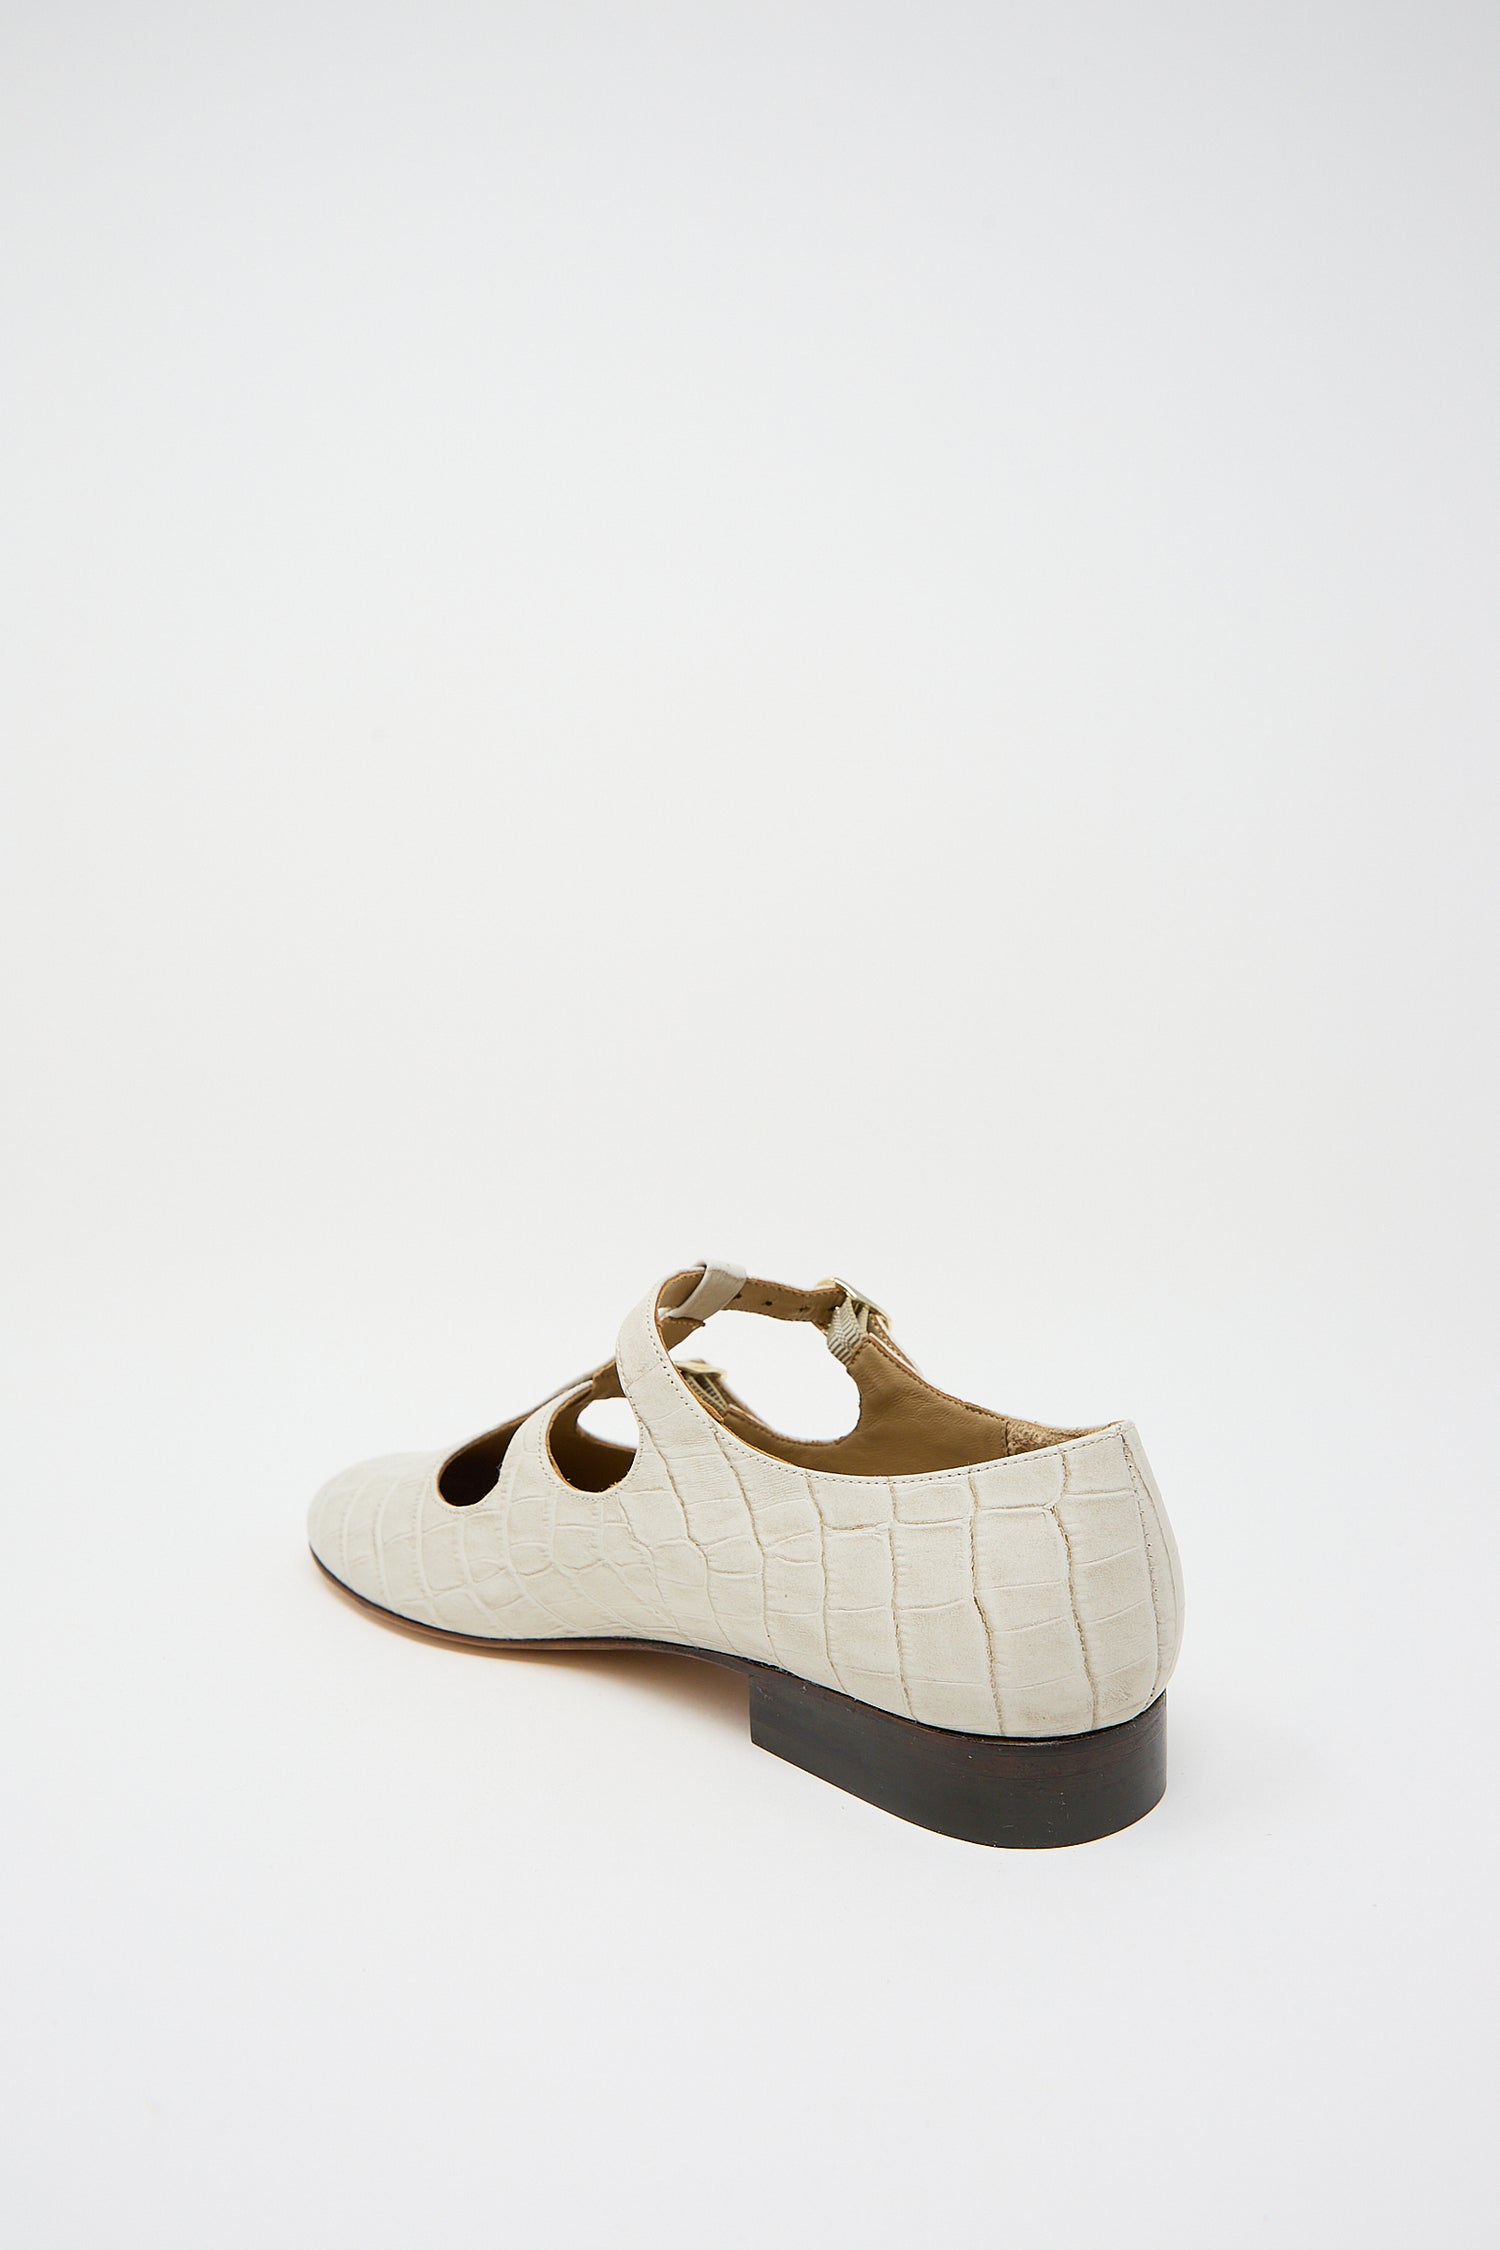 A single Alfie Flat in Ivory Embossed Leather shoe by Caron Callahan against a plain background.